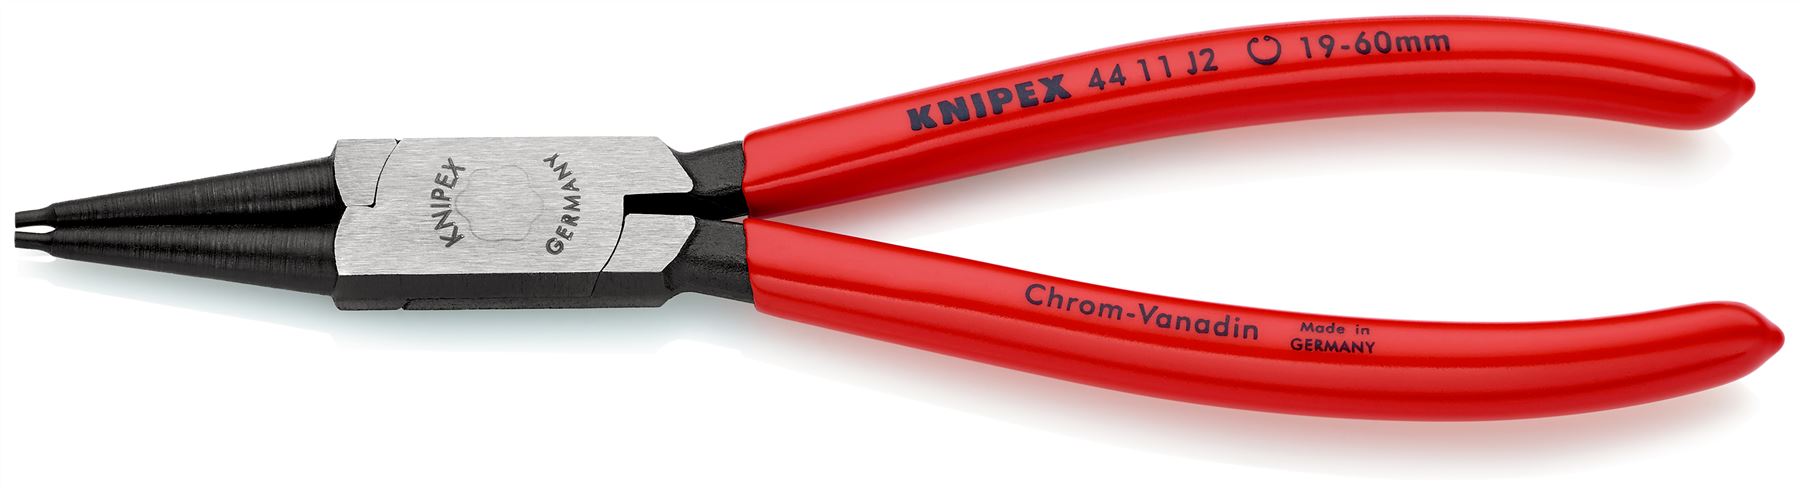 KNIPEX Circlip Pliers for Internal Circlips in Bore Holes 180mm 1.8mm Diameter Tips 44 11 J2 SB